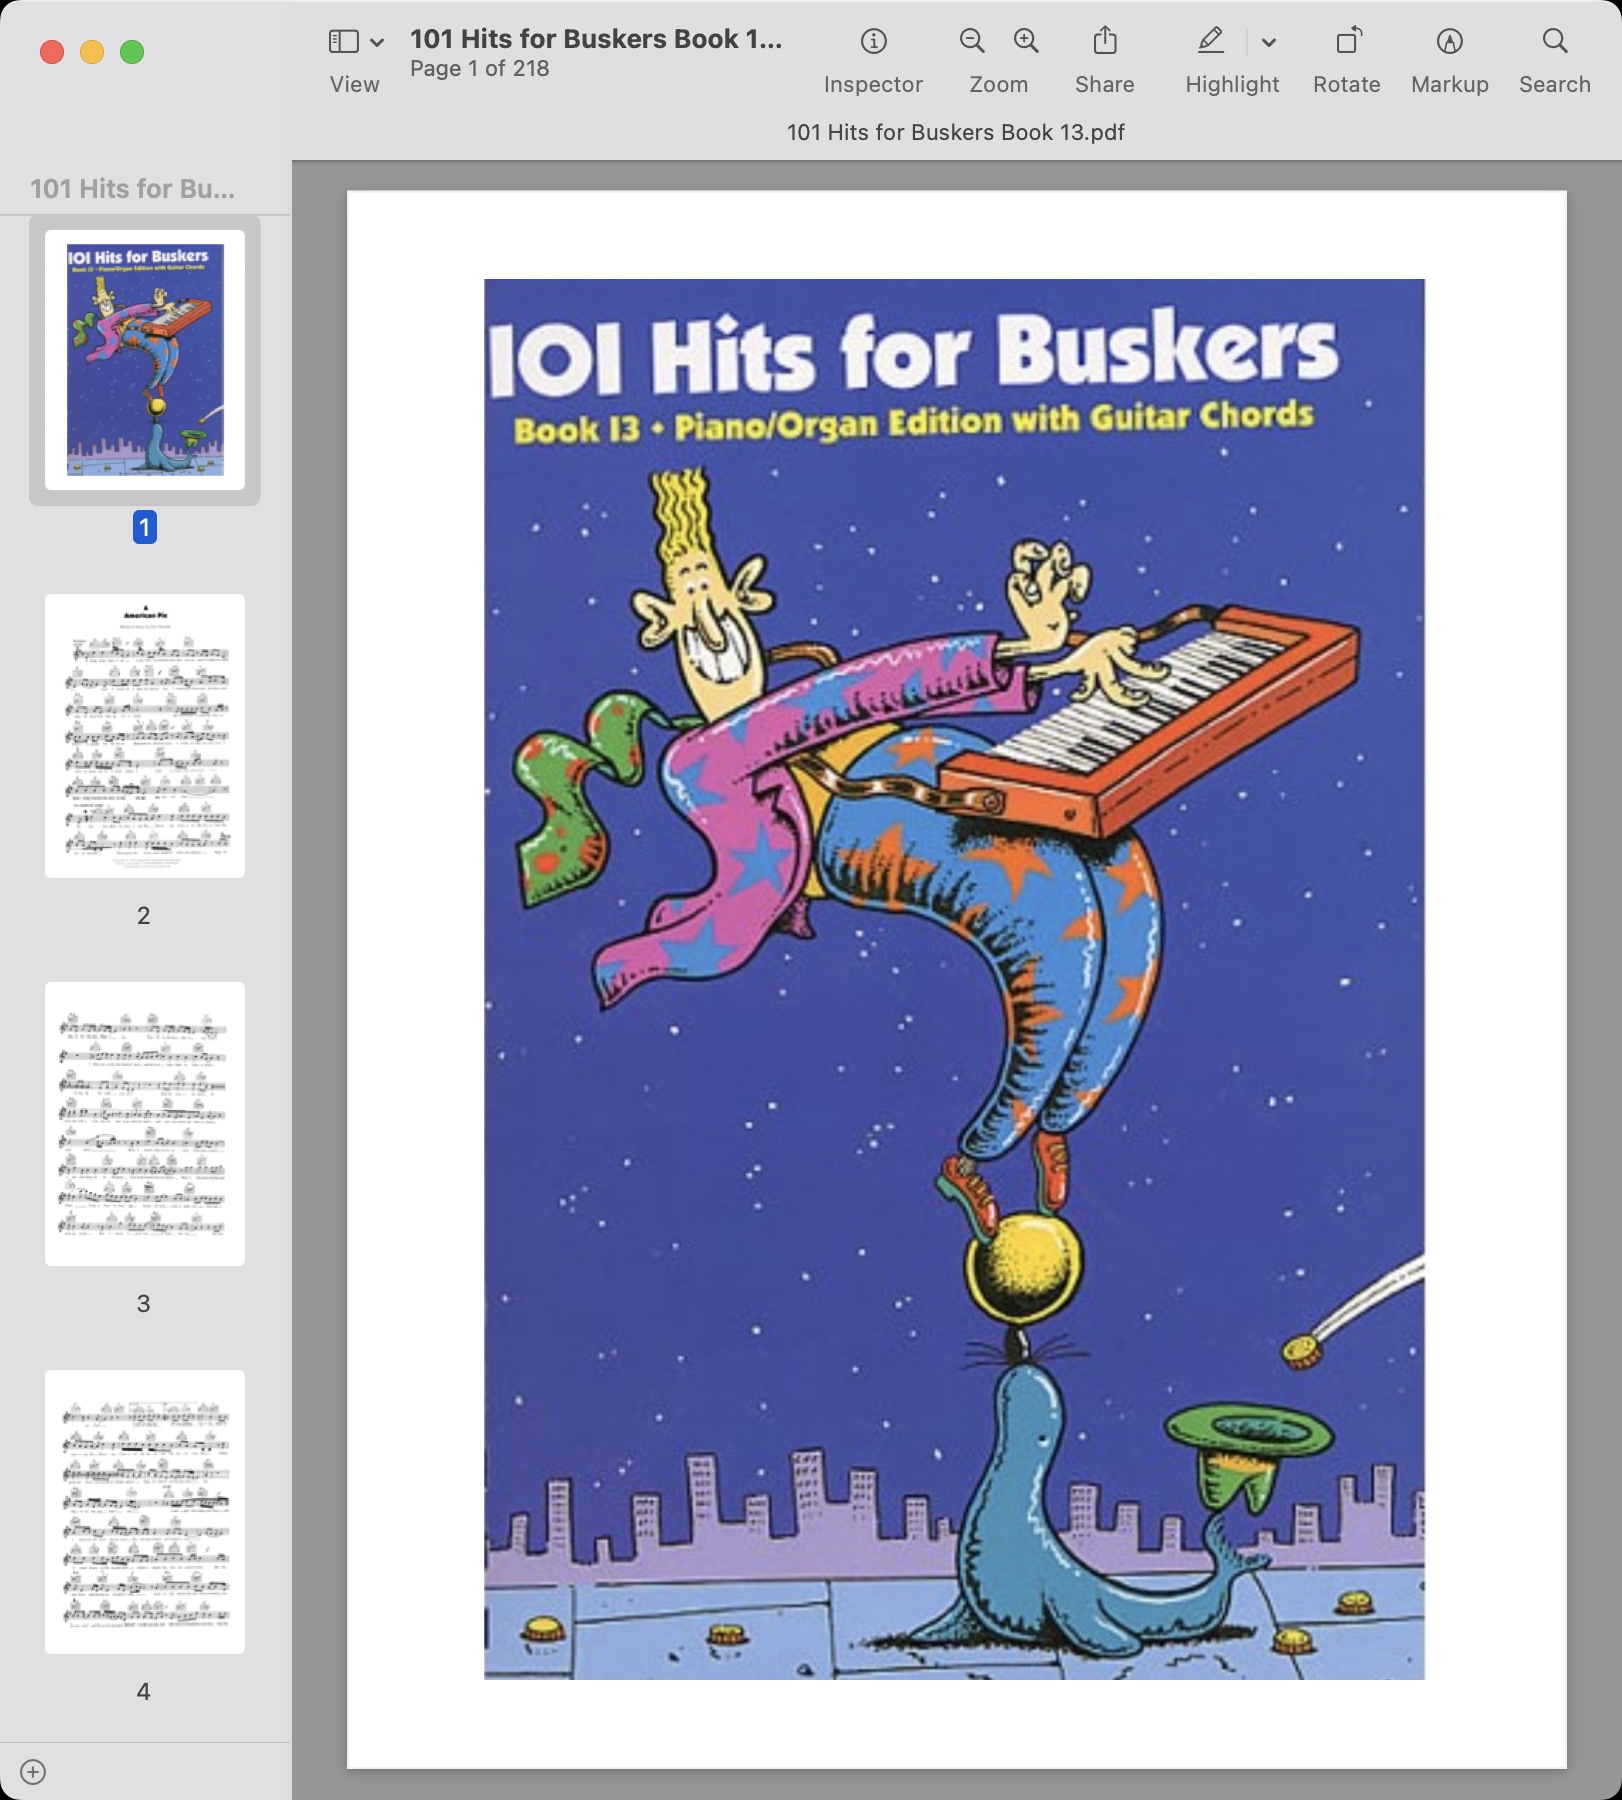 101 Hits for Buskers Book 13.jpg